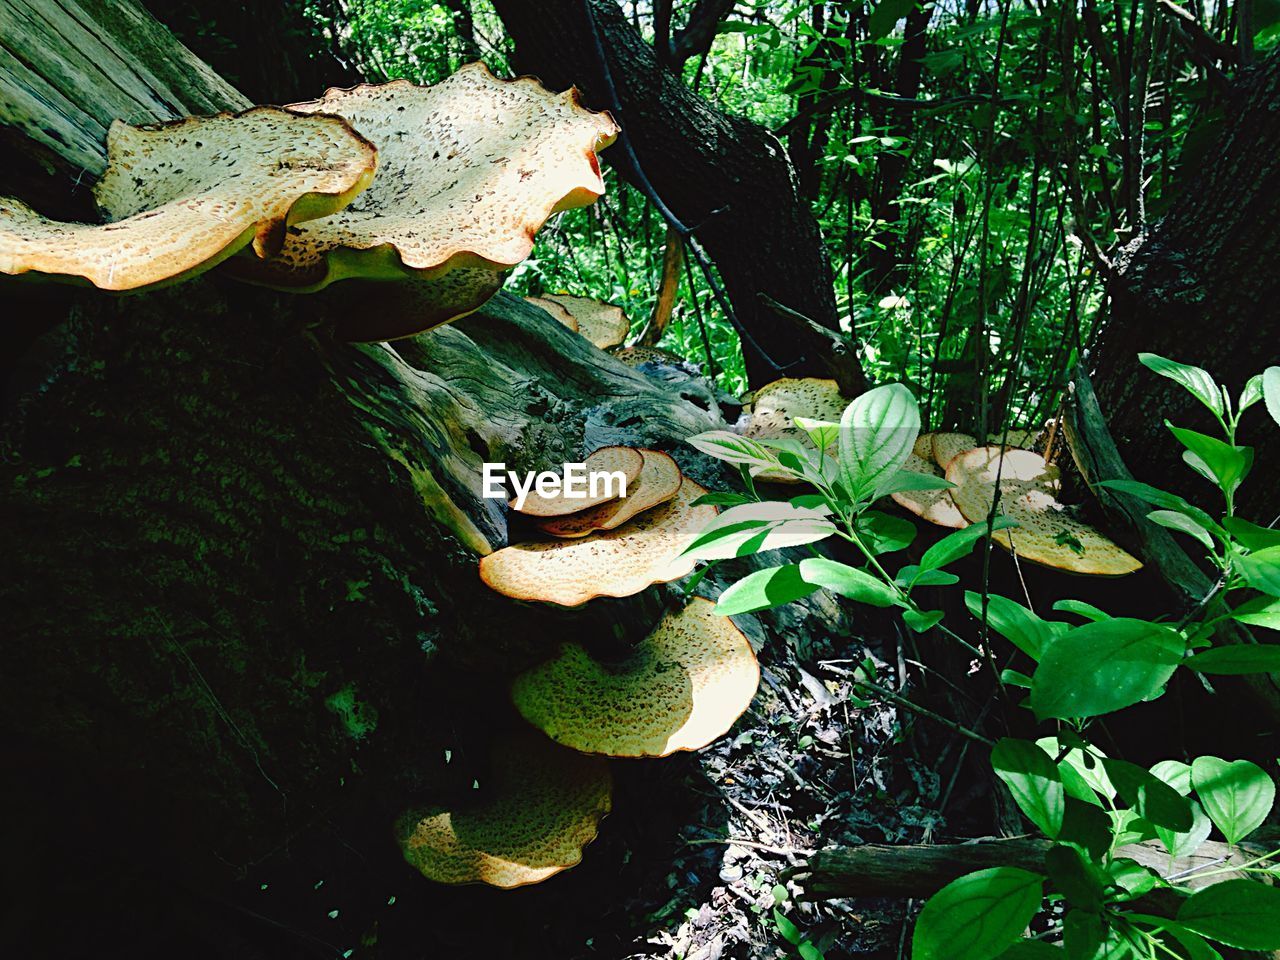 High angle view of mushrooms growing on tree trunk in forest